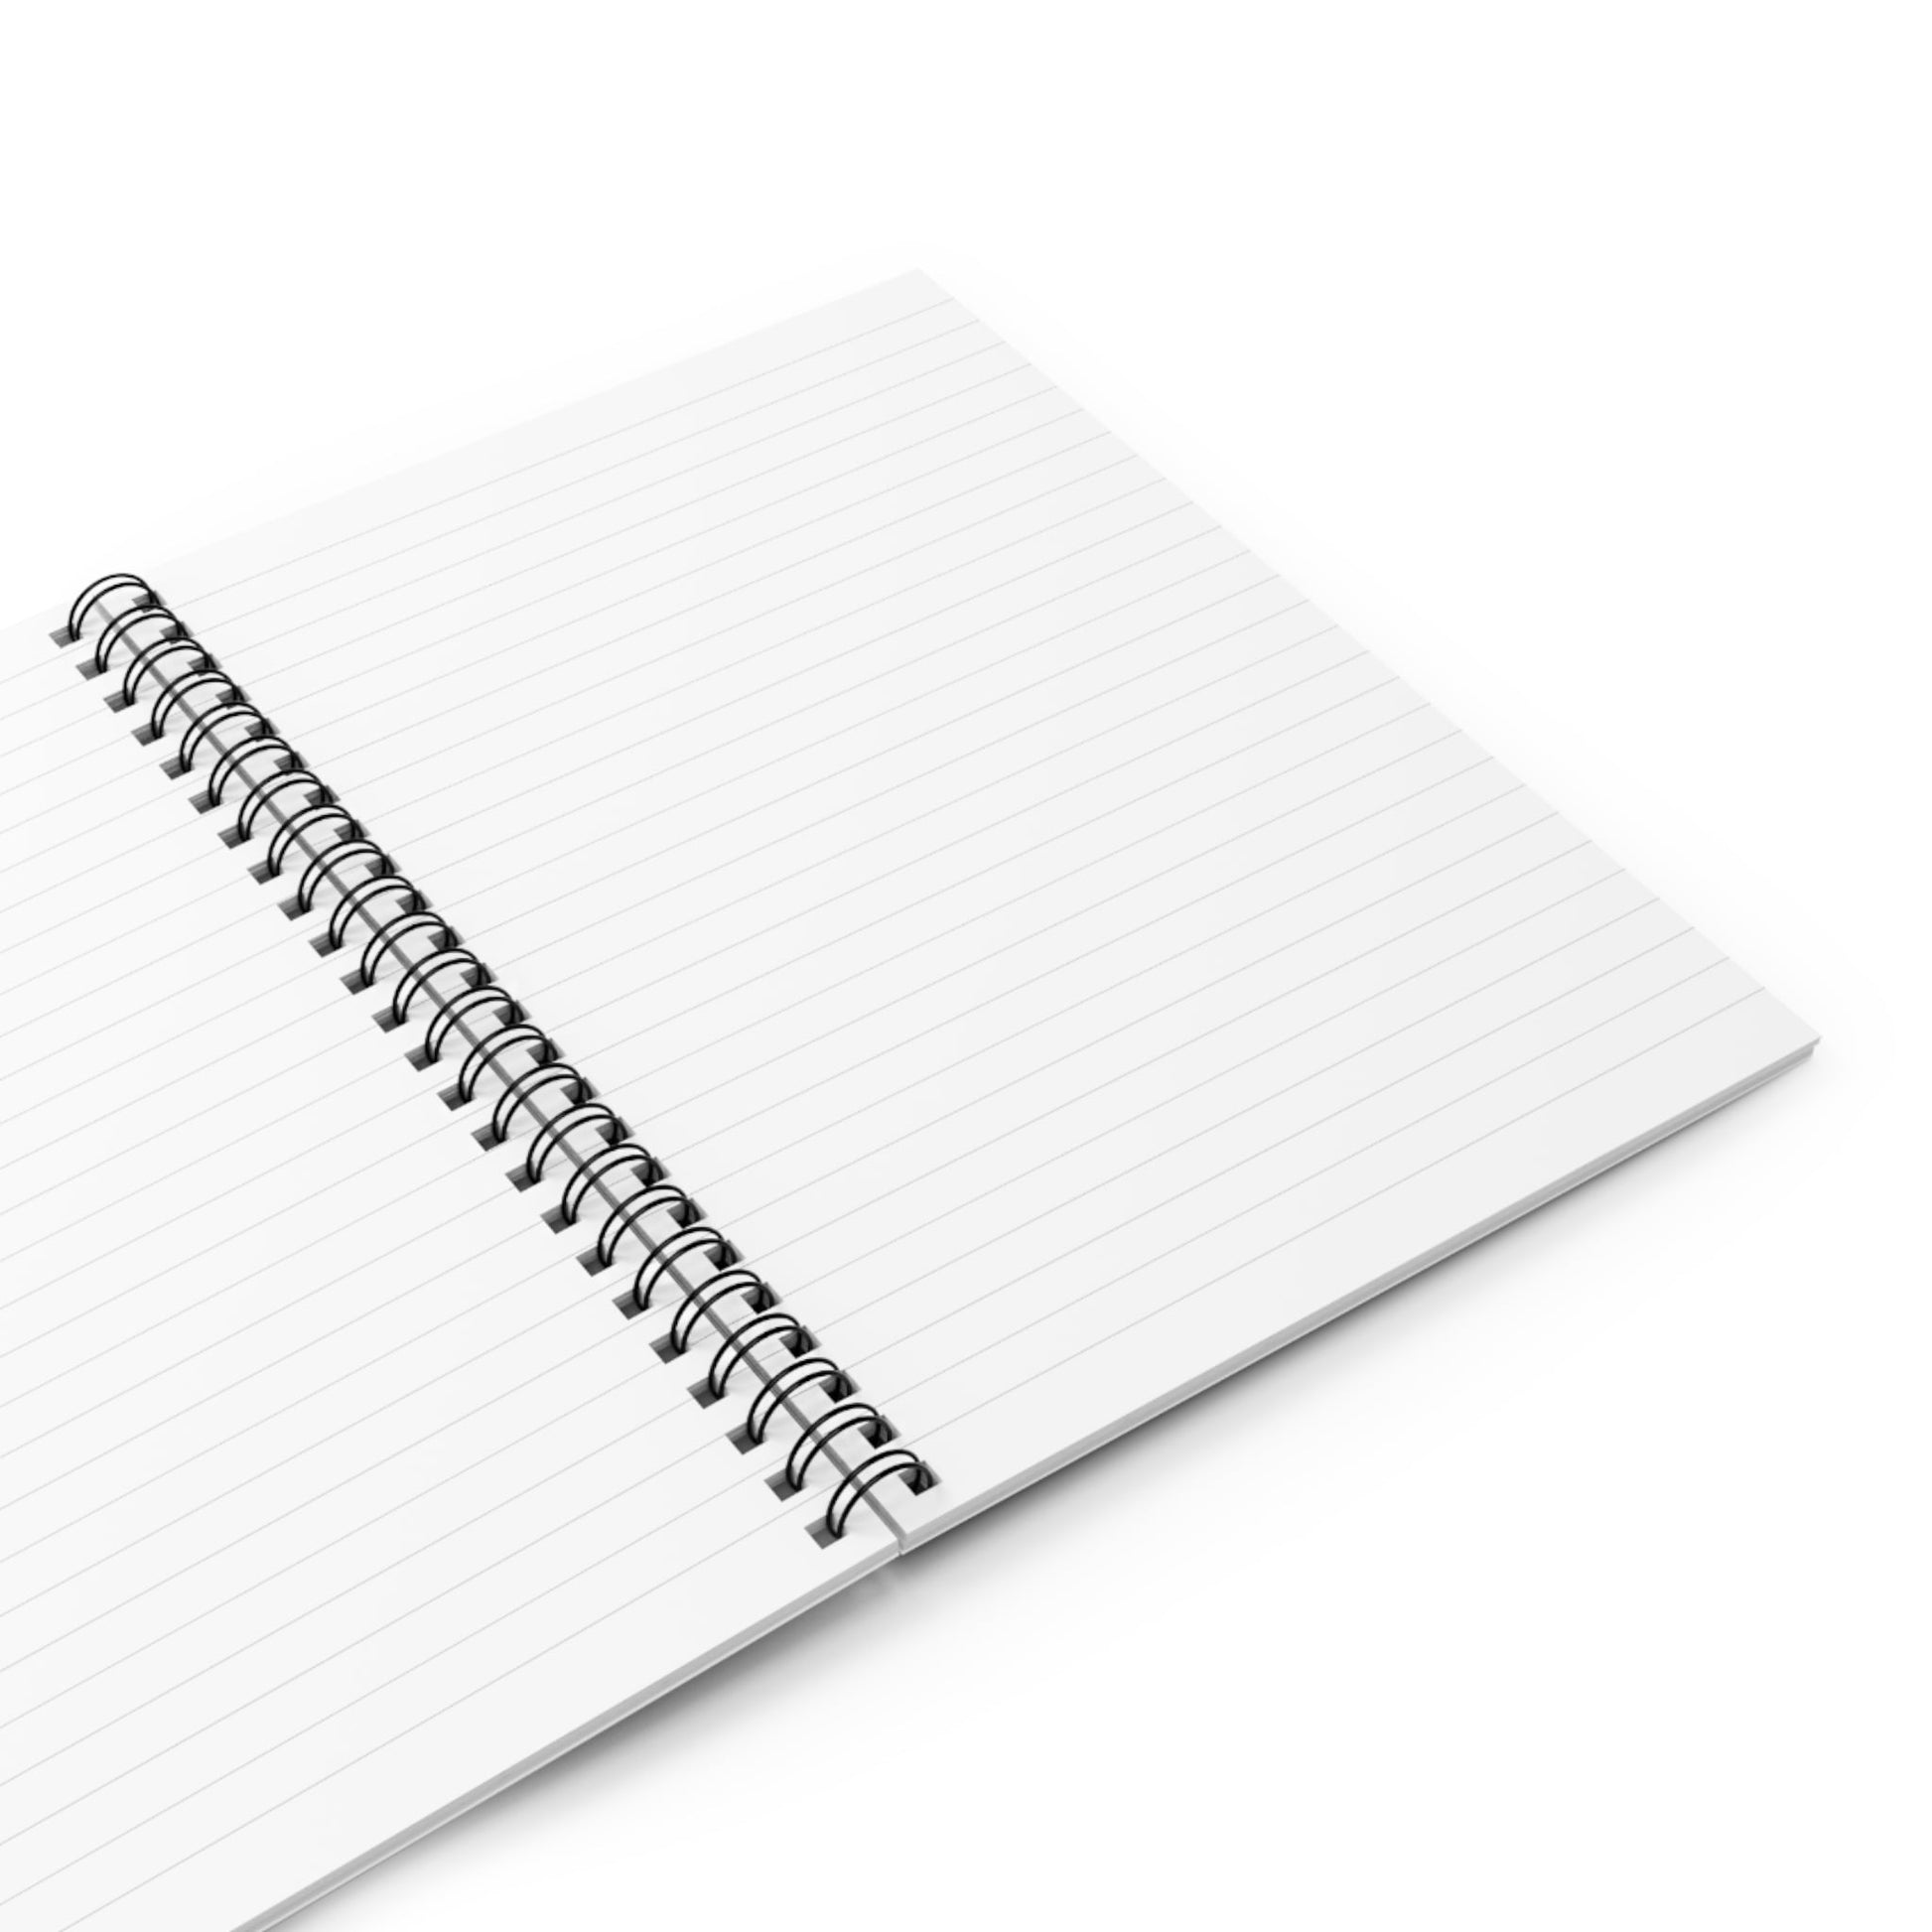 Spiral Notebook with Revitalized Cover Opened with Blank White College Ruled Pages